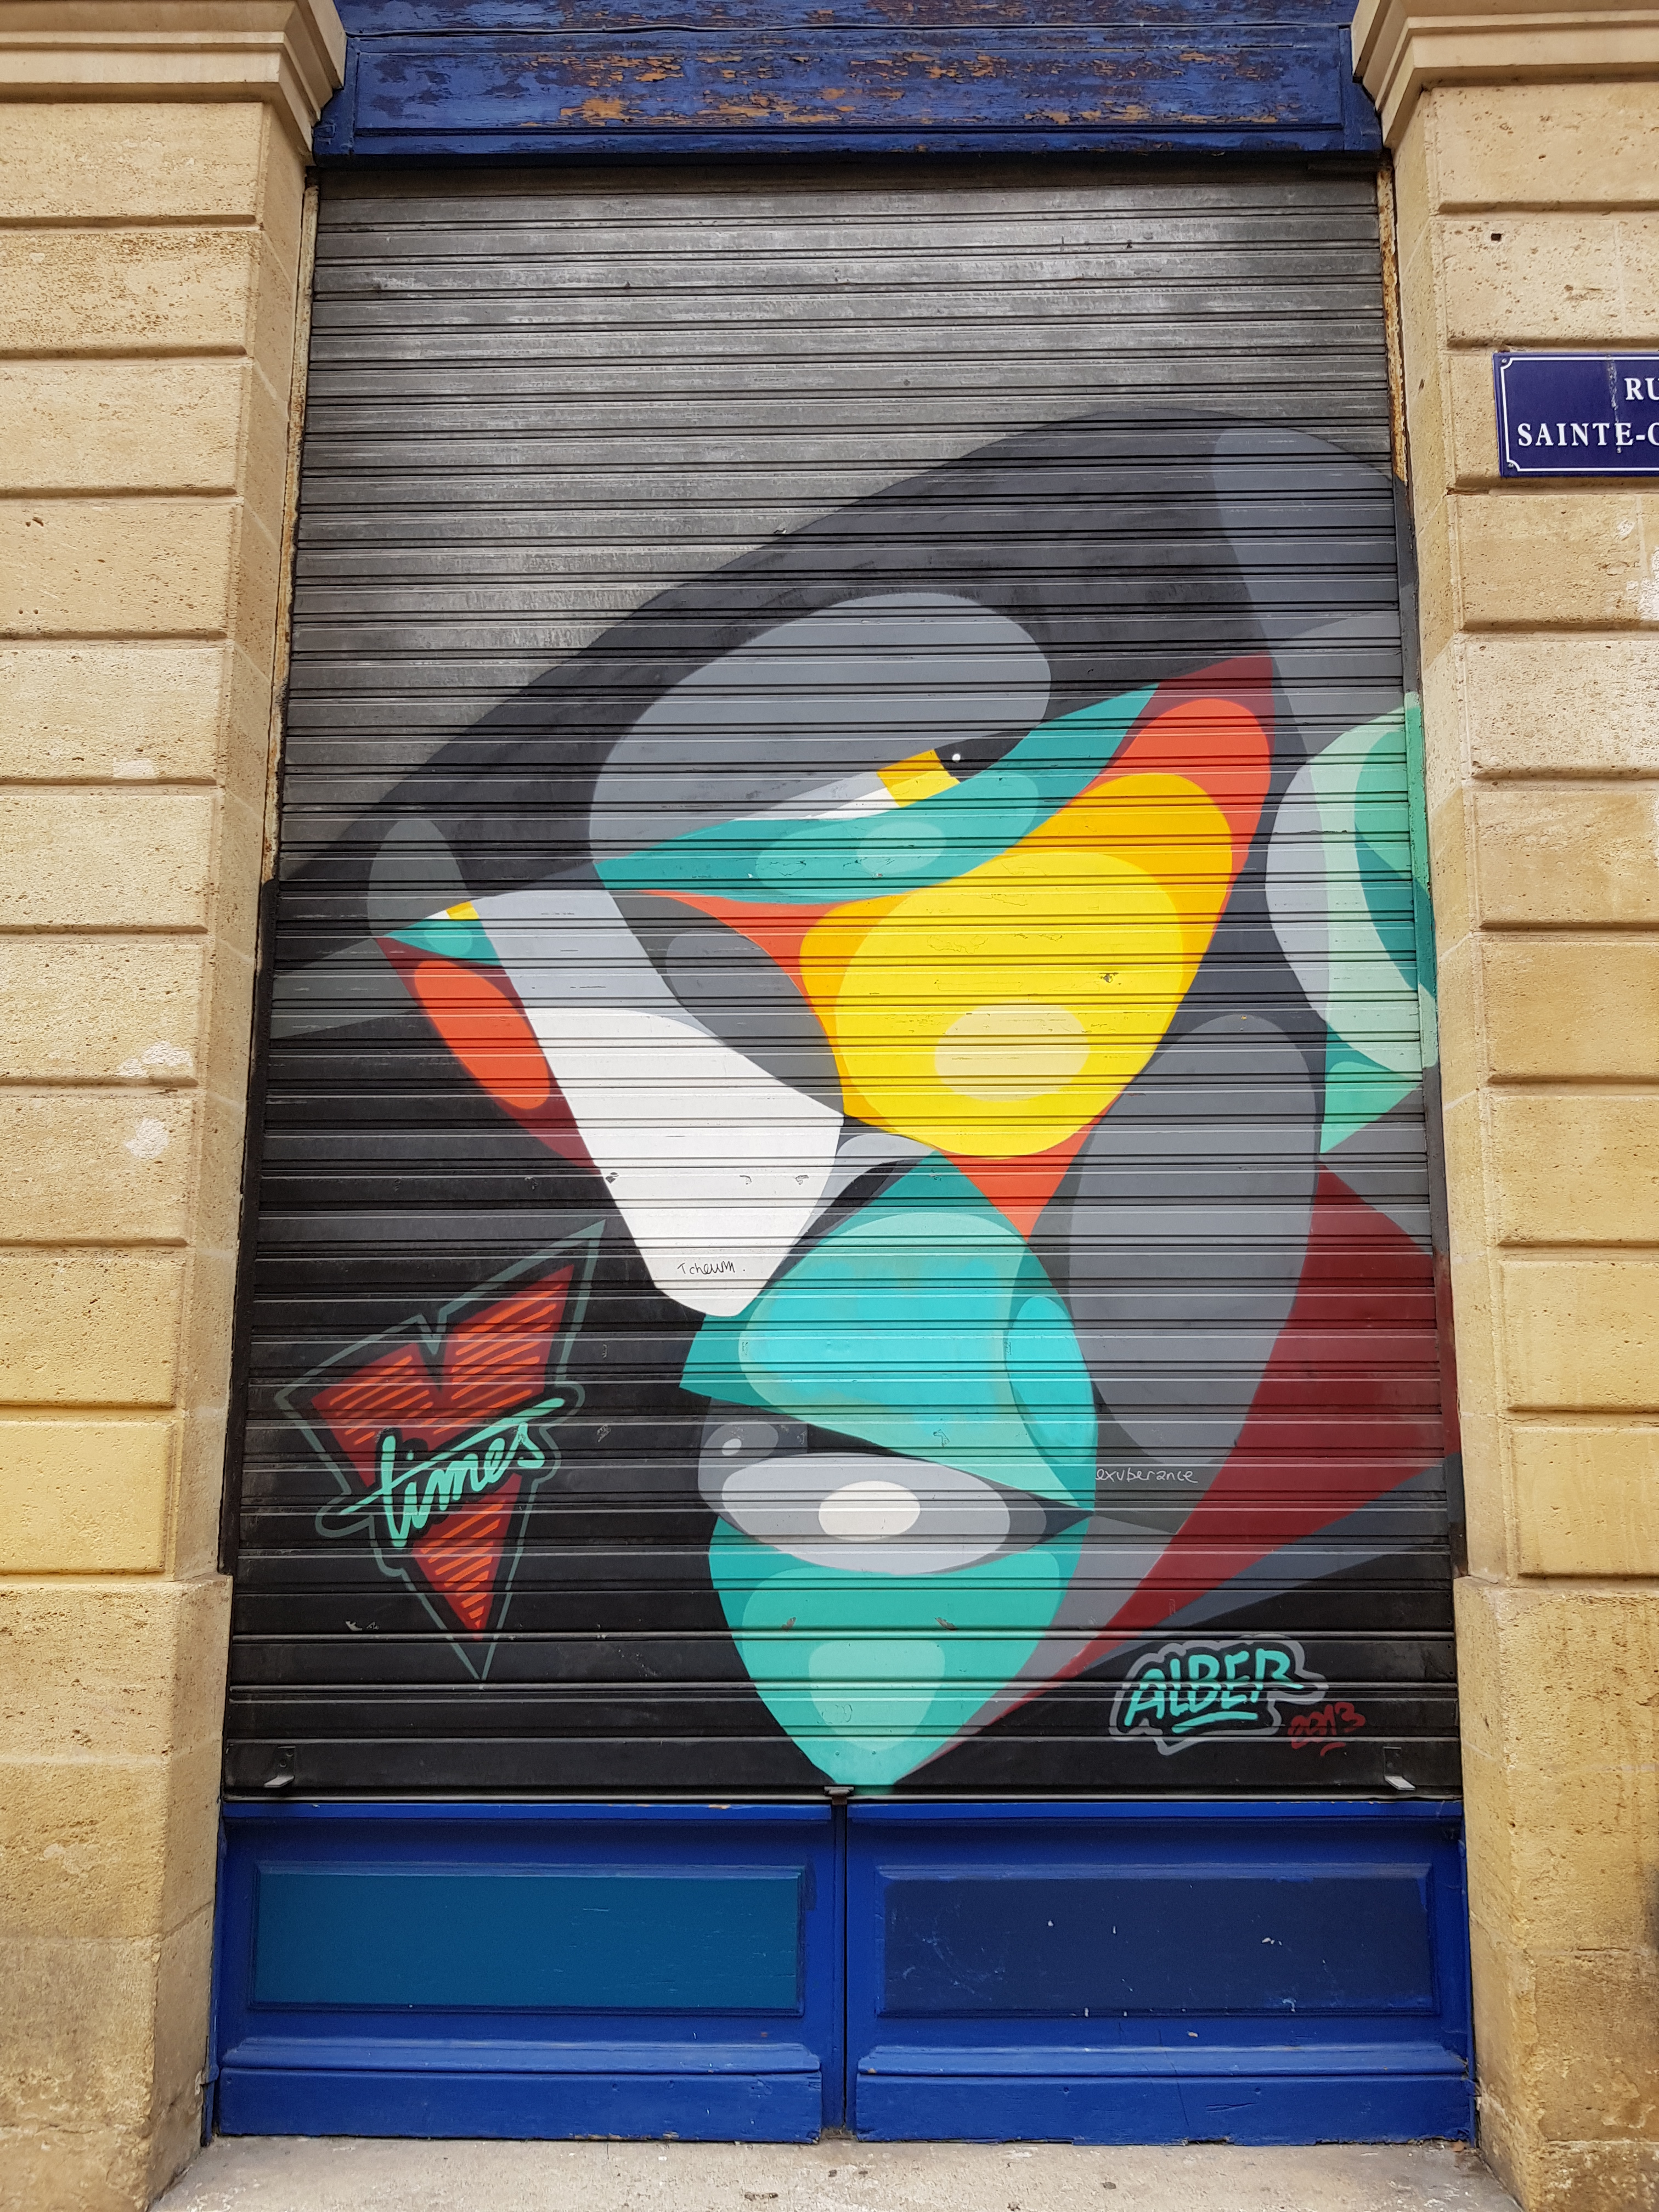 Graffiti 6877  by the artist Alber captured by Mephisroth in Bordeaux France